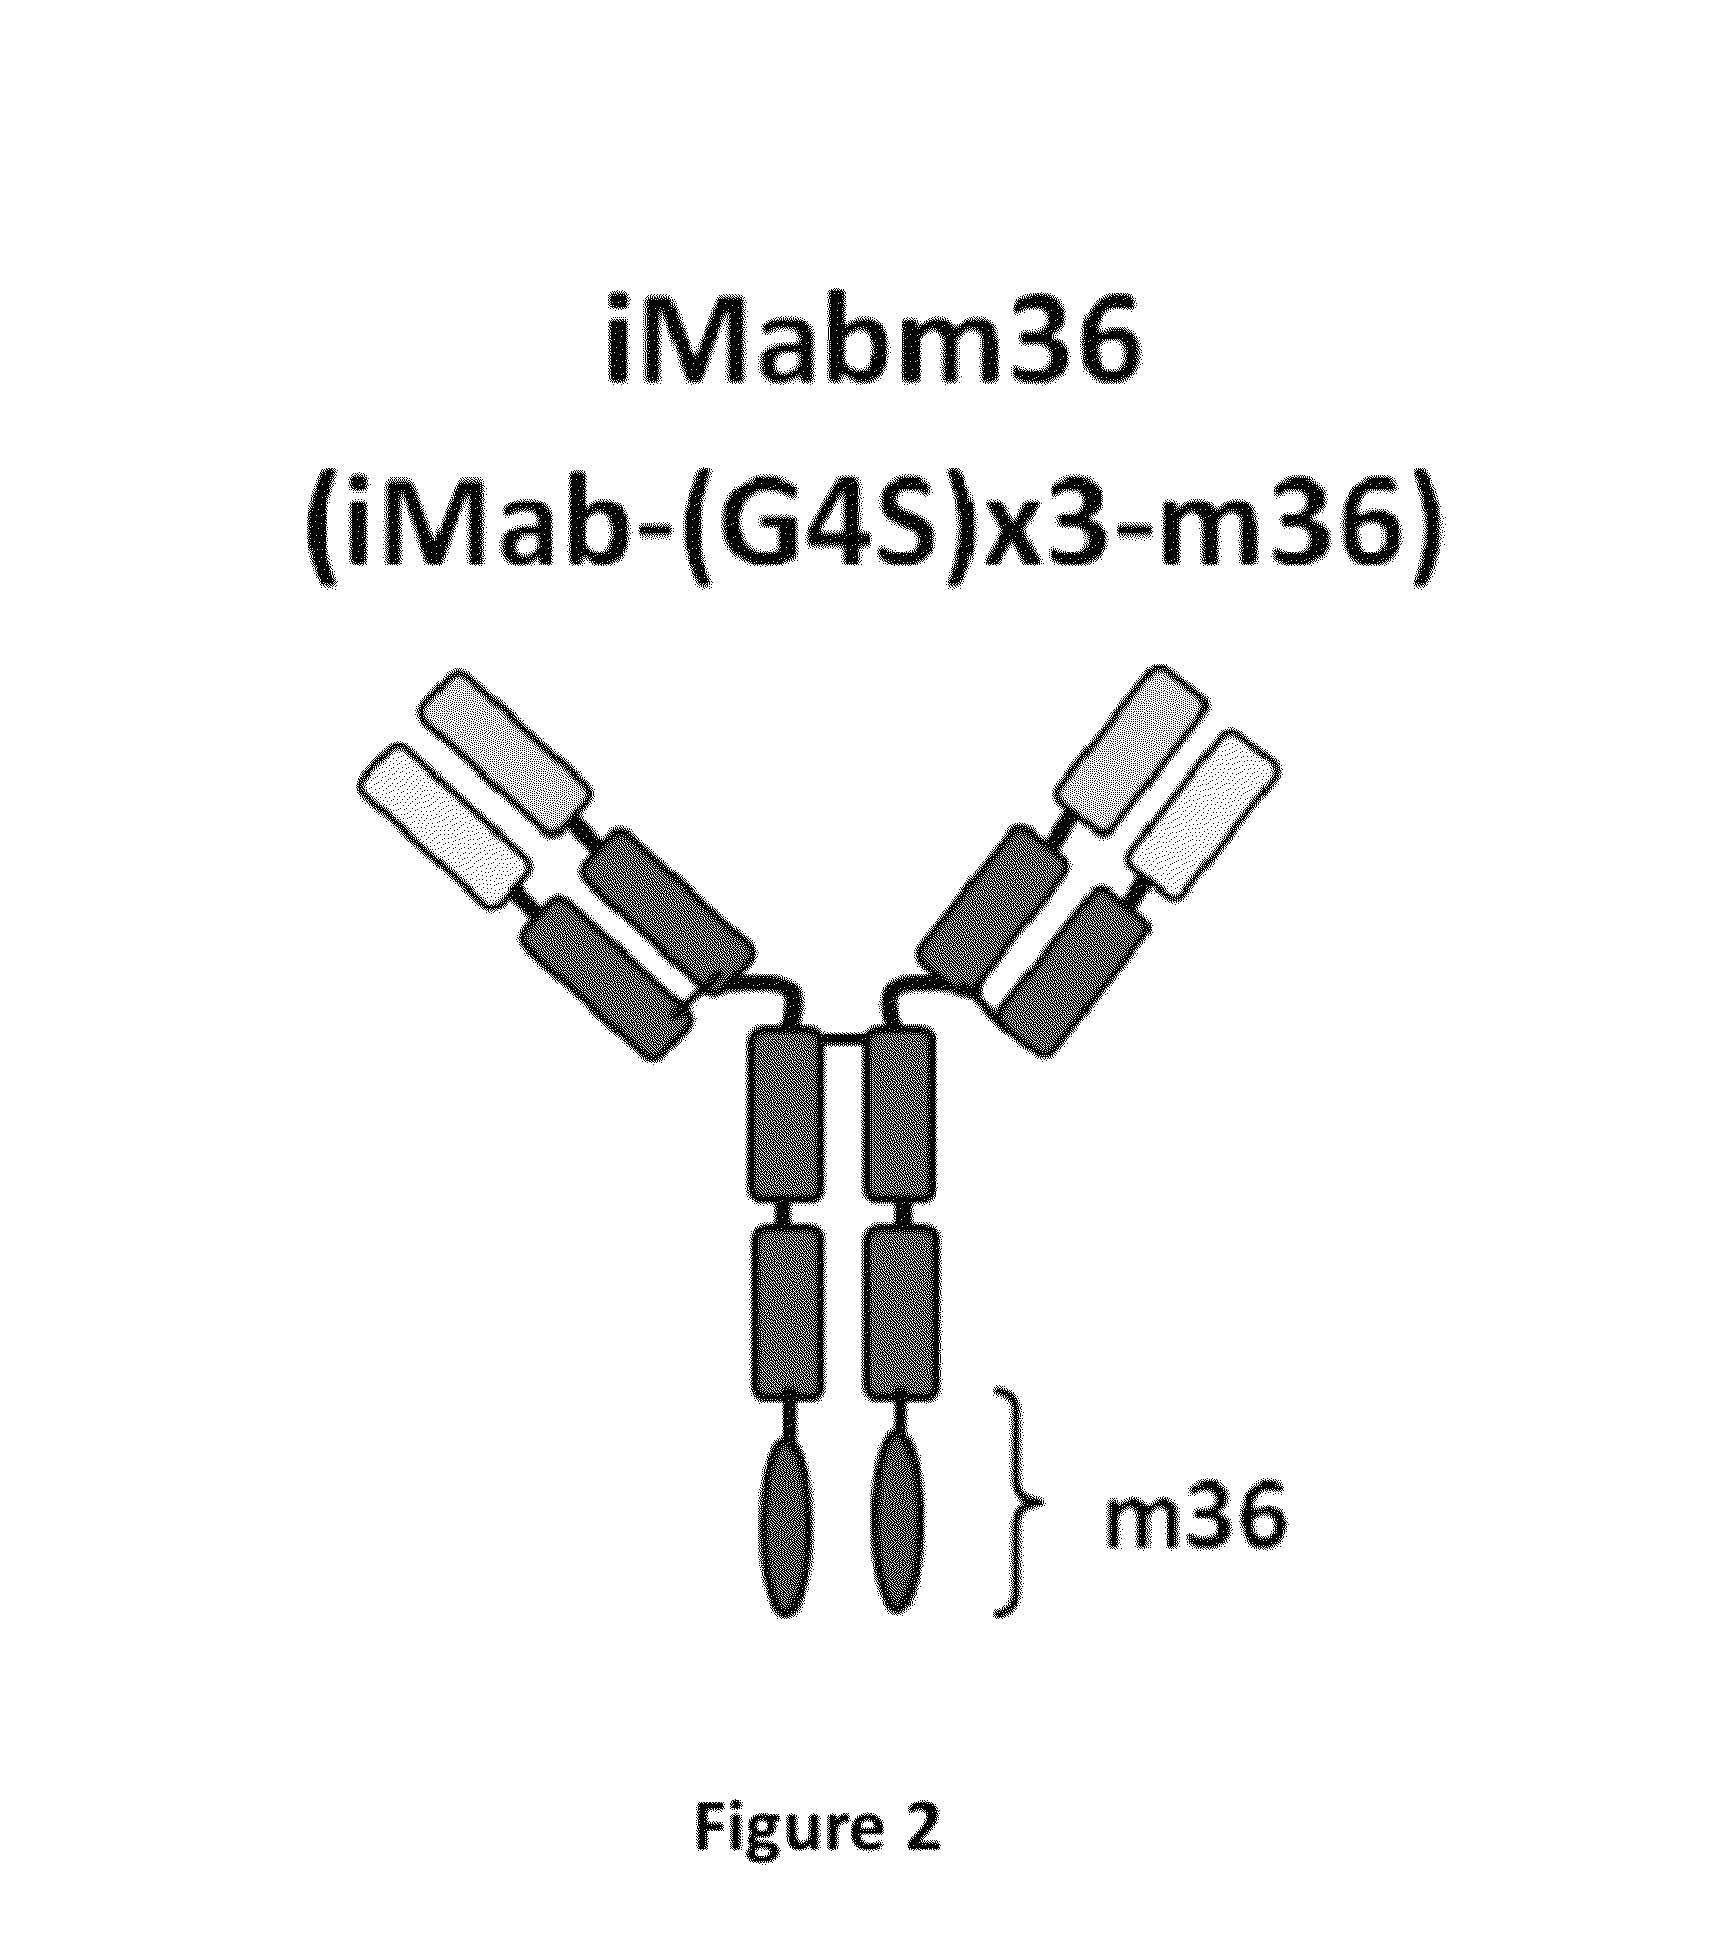 Fusion antibodies for HIV therapy